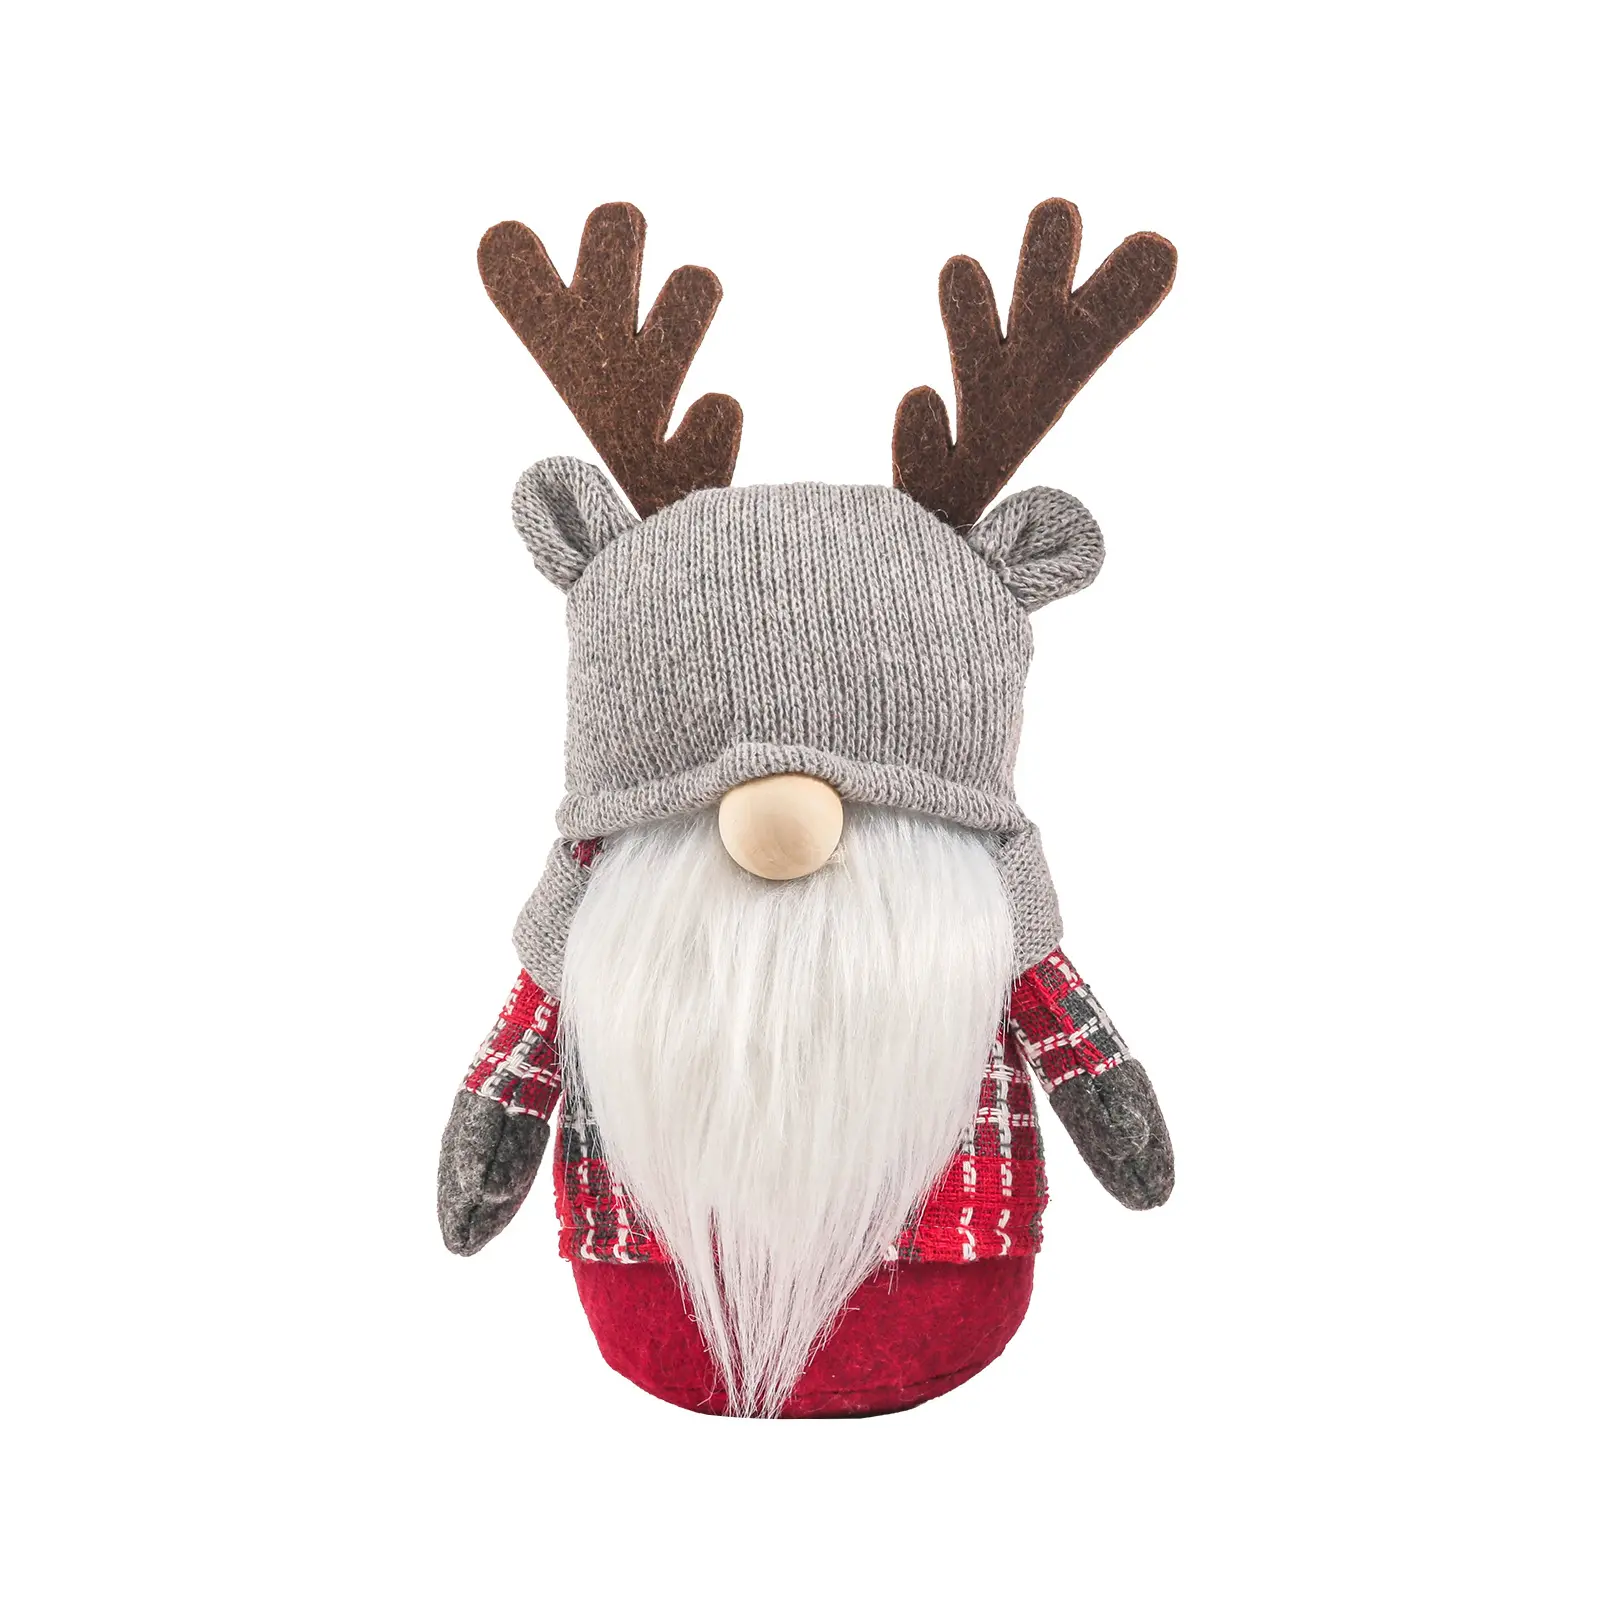 High Quality Hot sale products Handmade Christmas Decorations Gifts Red Plaid Cloth Plush Gnomes Gonks Dolls With Antler